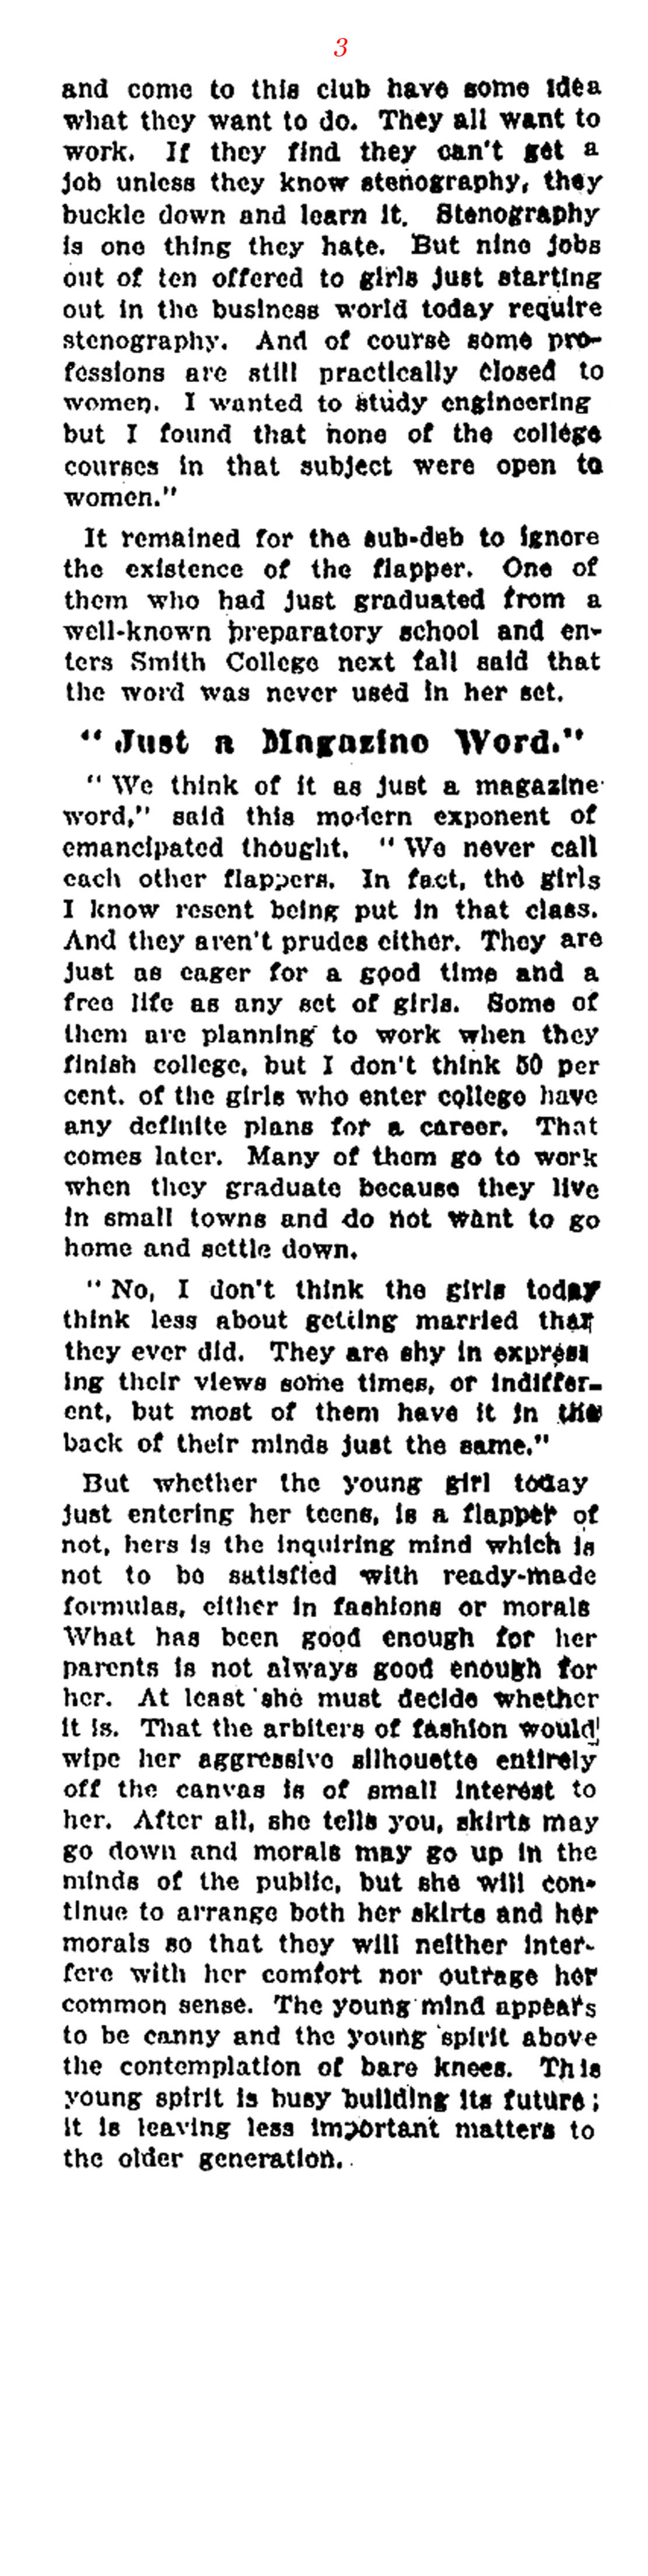 The Spirit of Flappers  (NY Times, 1922)